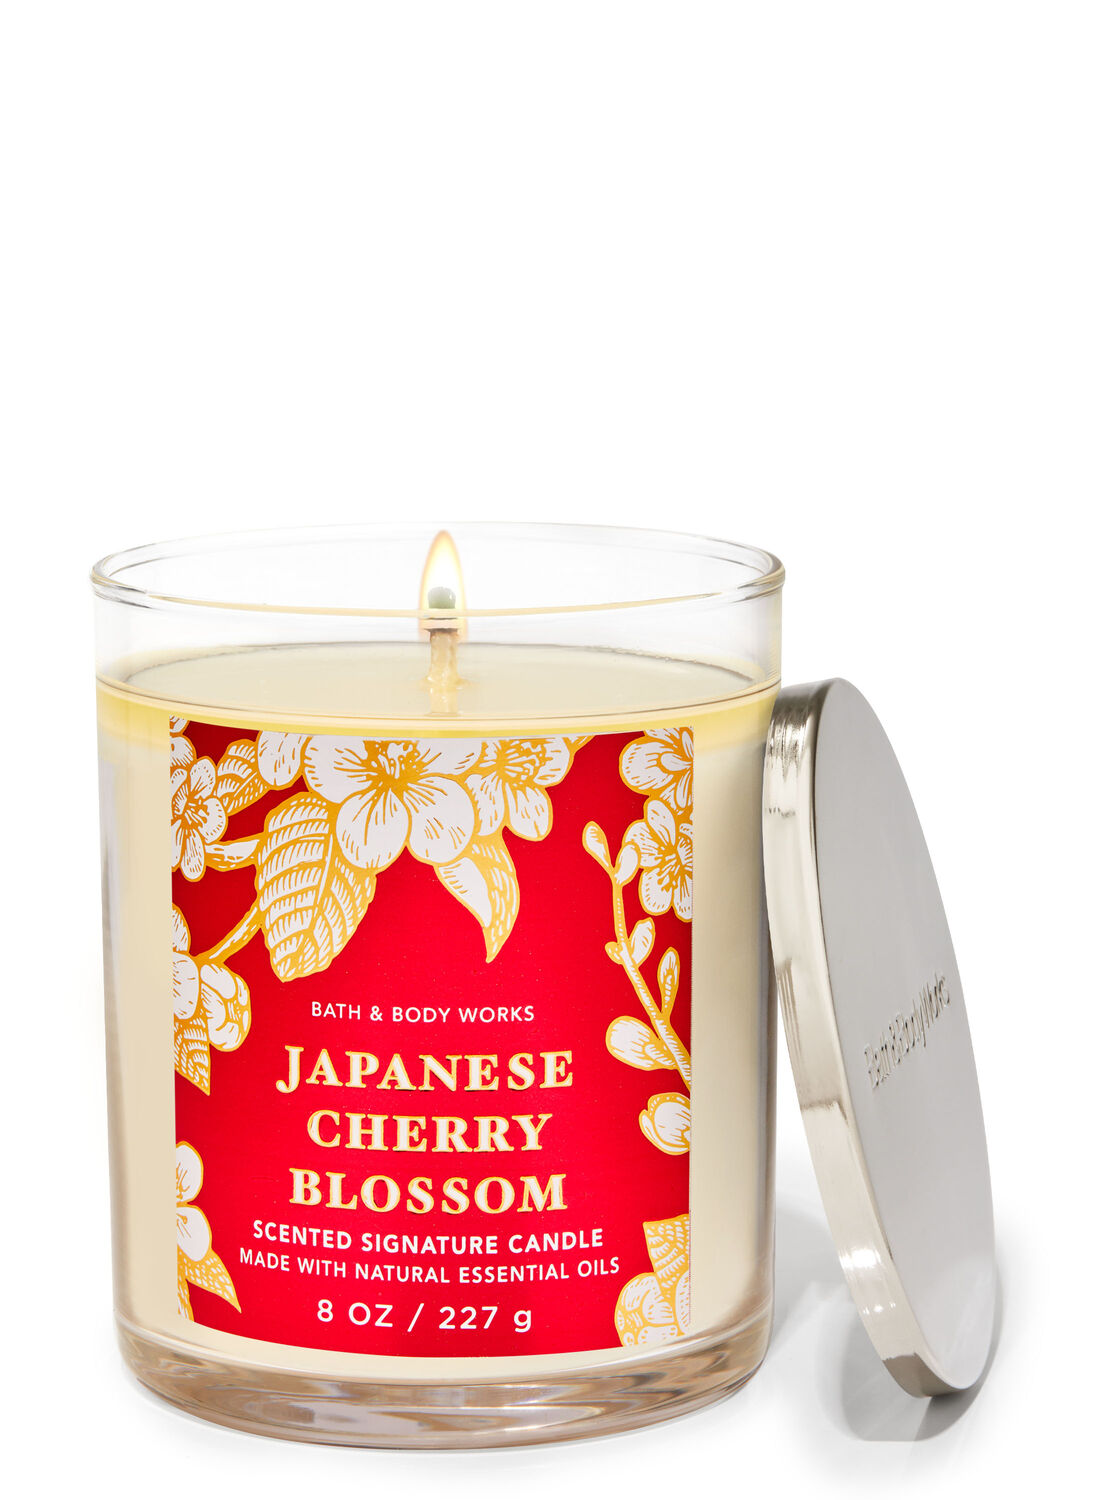 Bath & Body Works' Single-Wick Candles Are on Sale for Just $4